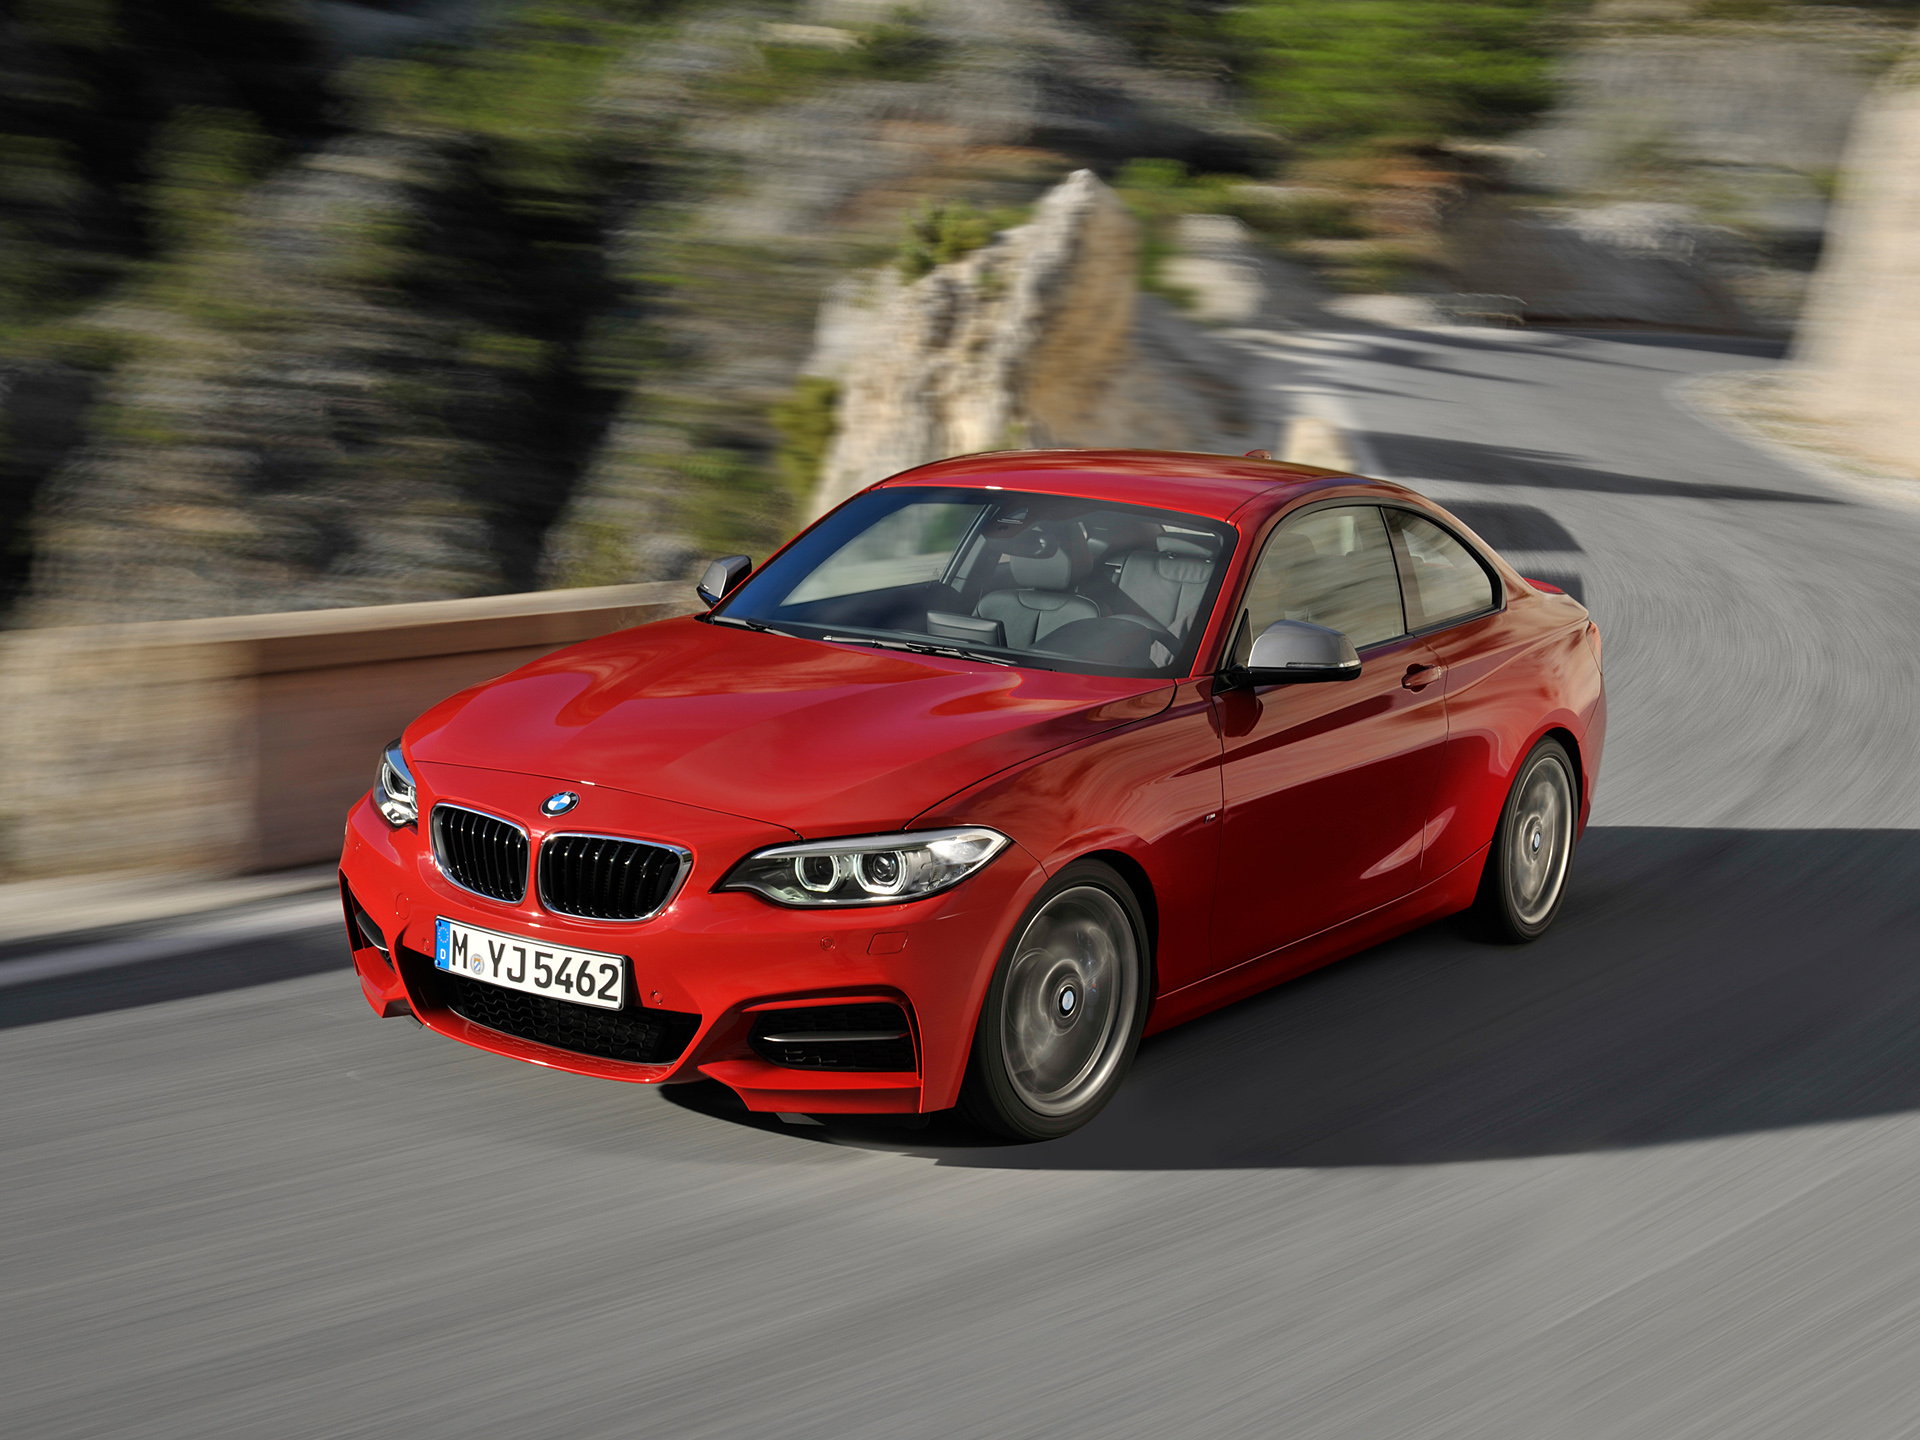  2014 BMW M235i Coupe Wallpaper.